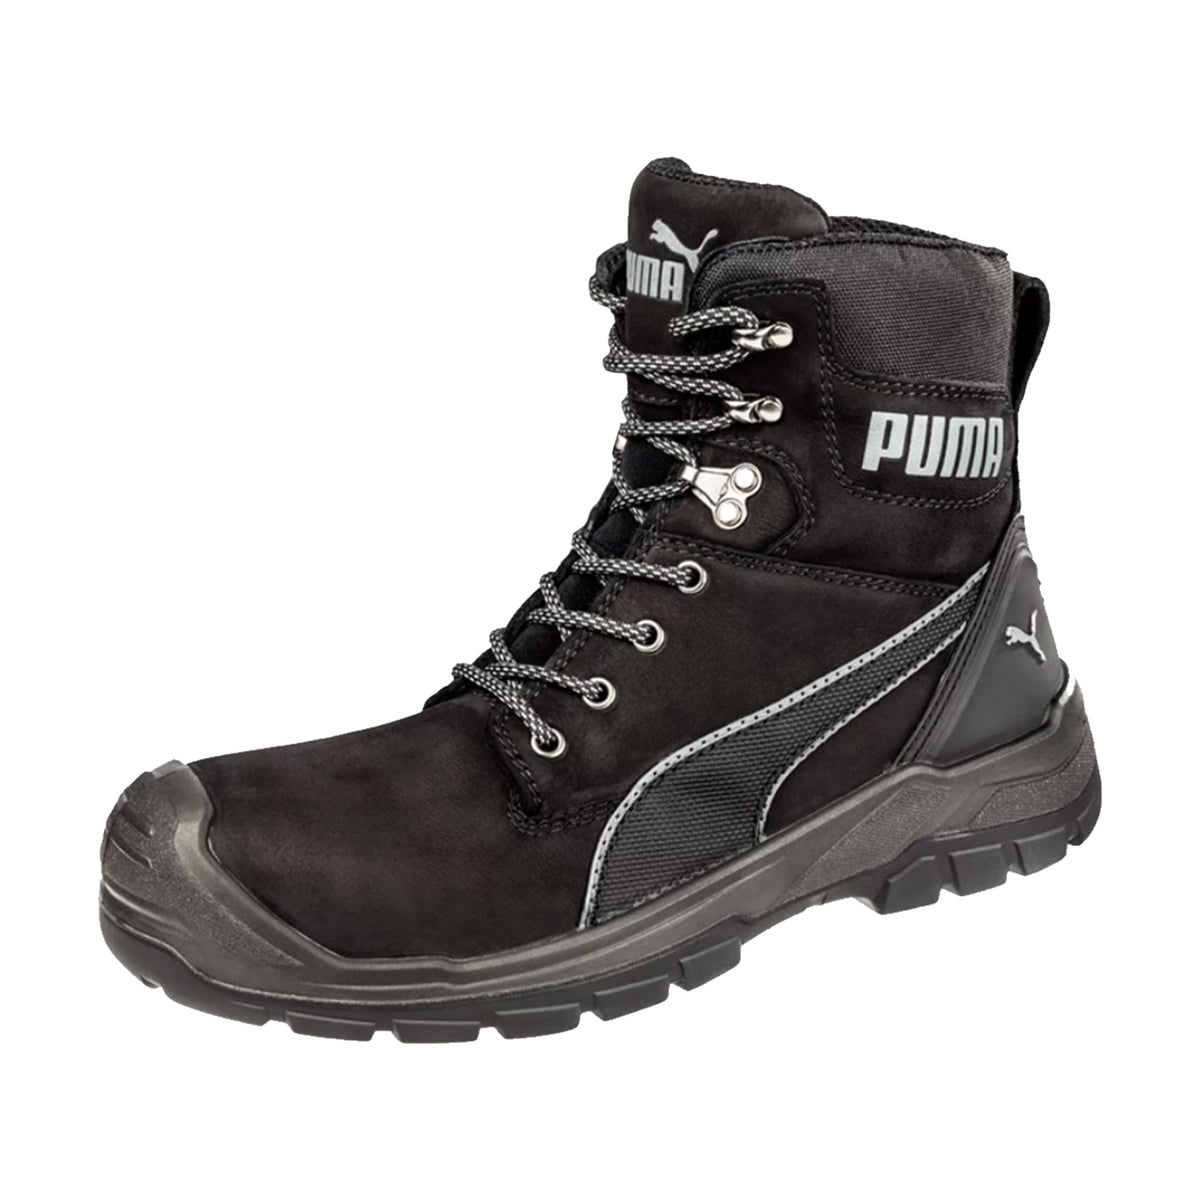 puma conquest safety boot in black